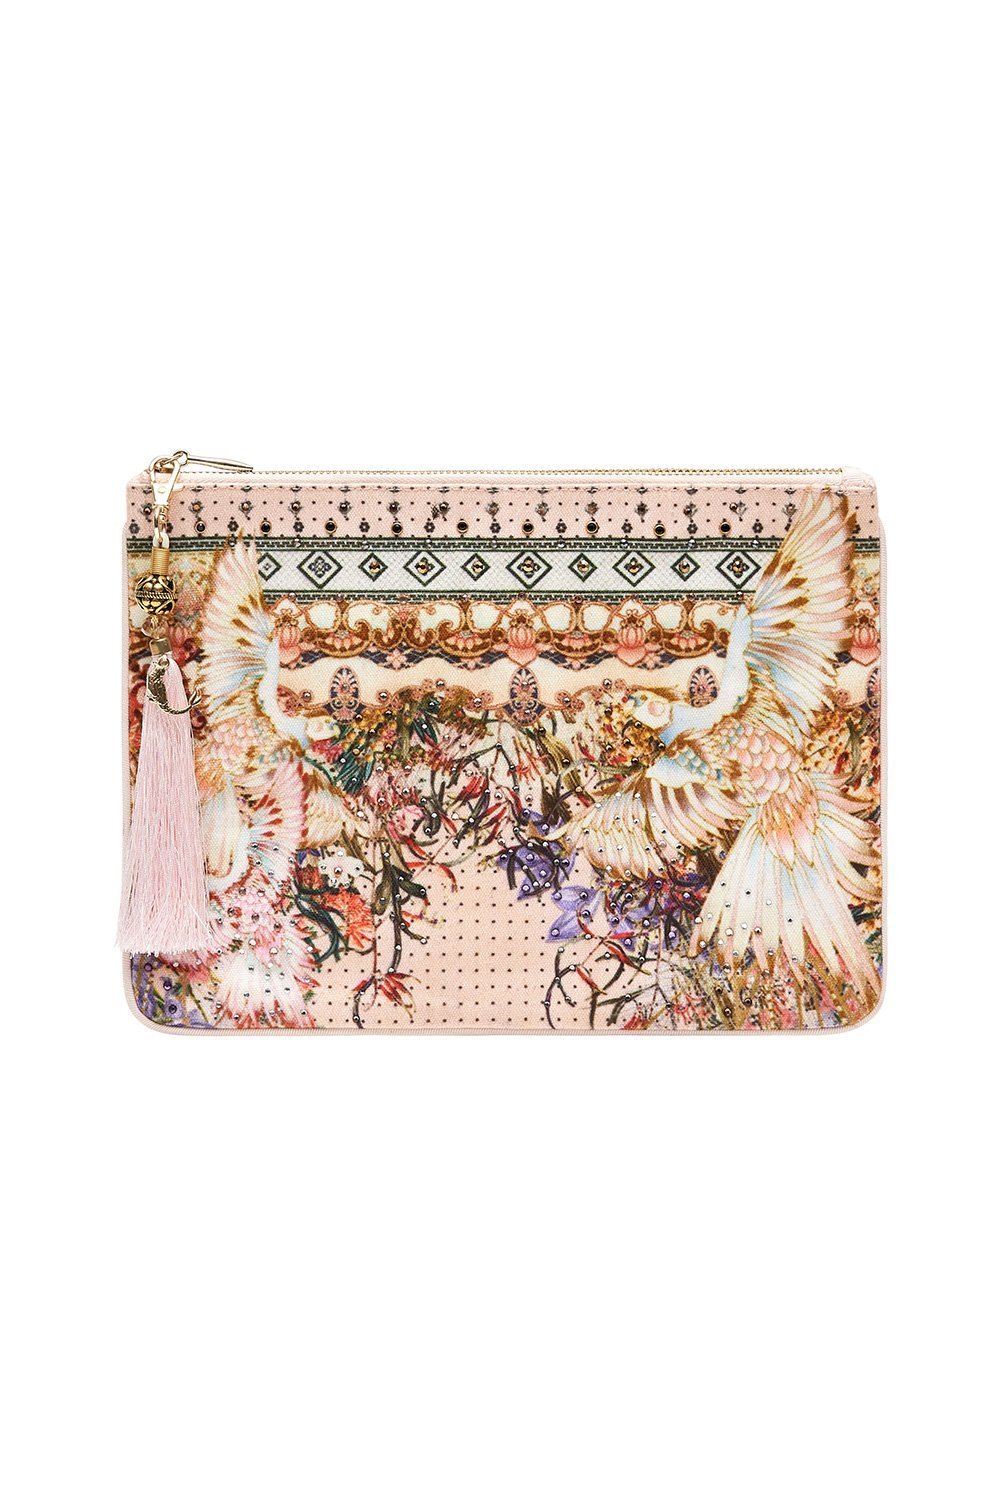 SMALL CANVAS CLUTCH KINDRED SKIES